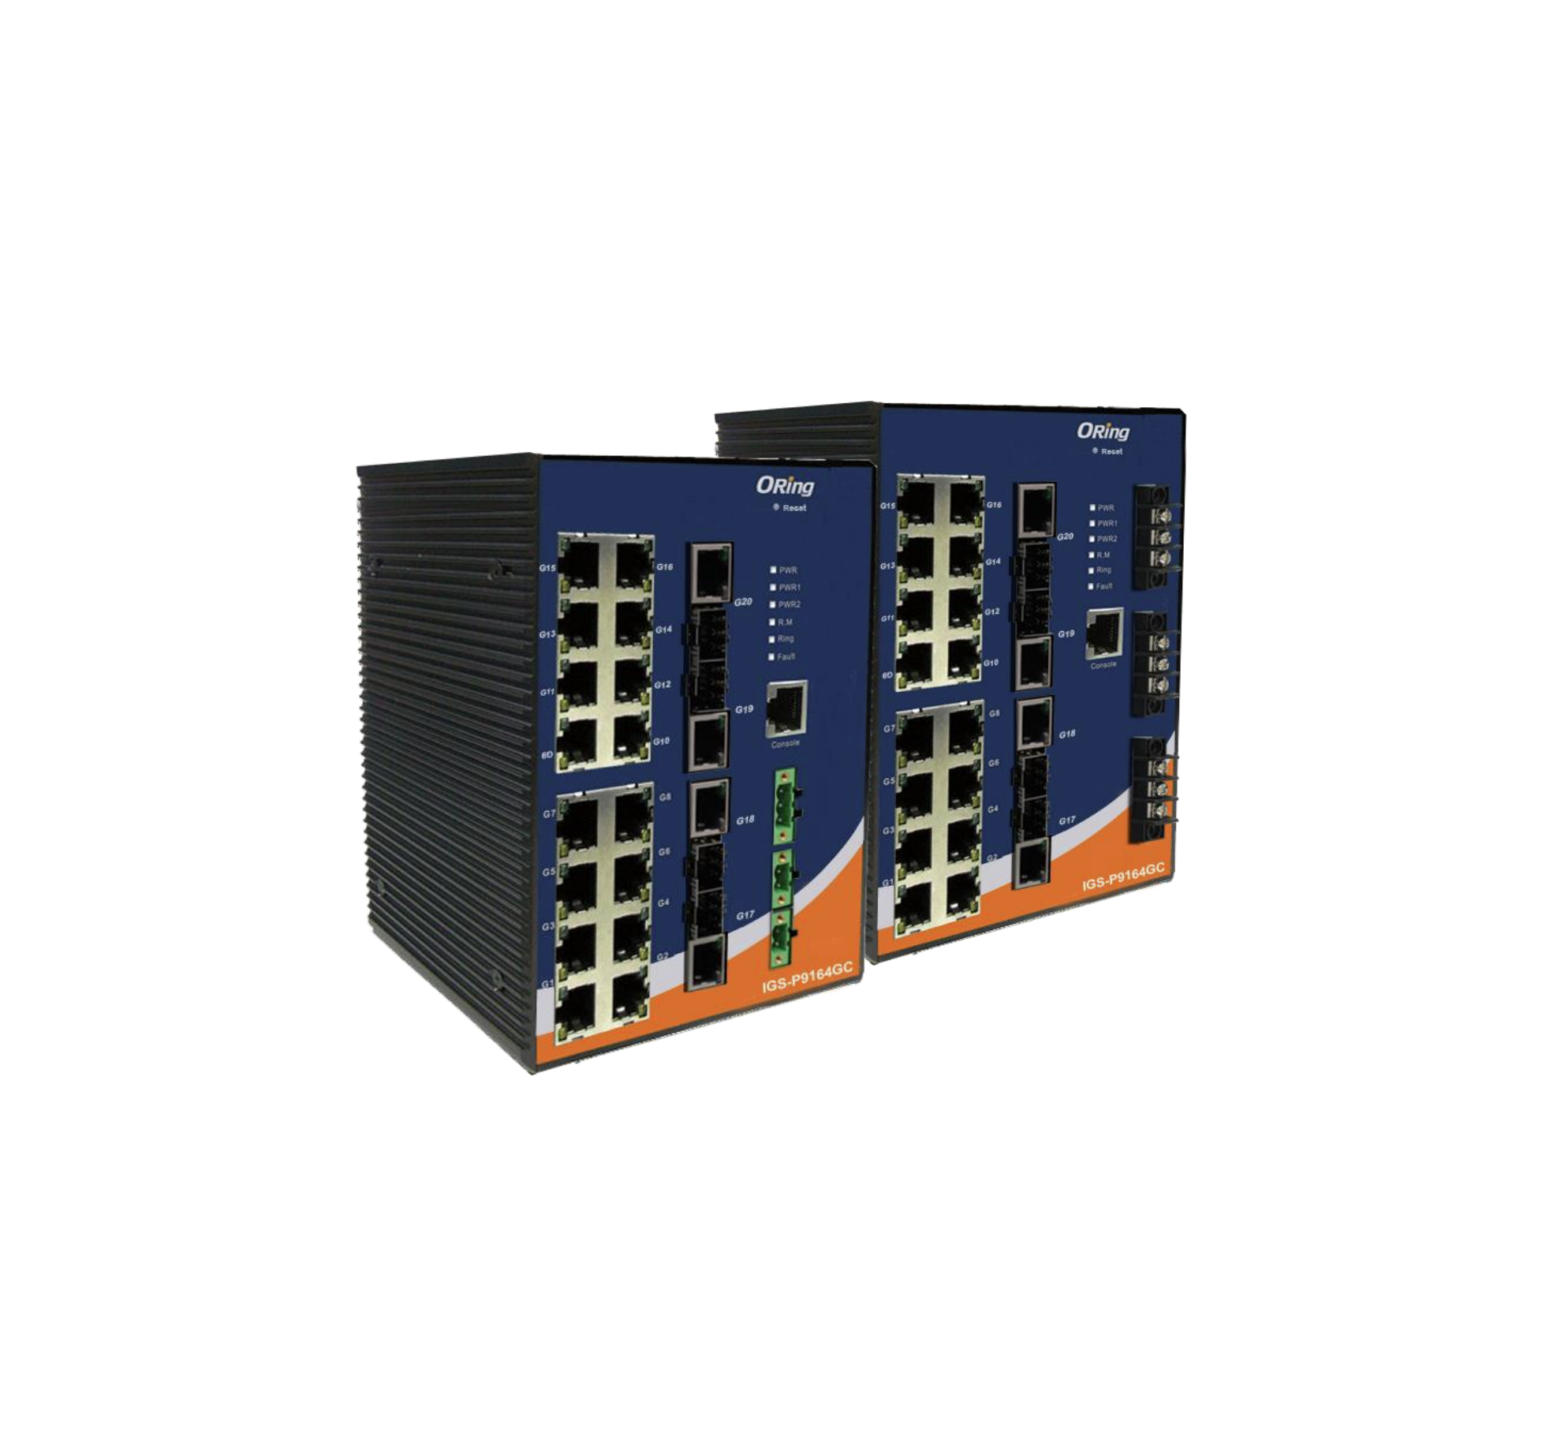 ORing IGS-P9164 Series Industrial IEC 61850-3 Managed Gigabit Ethernet Switch User Manual